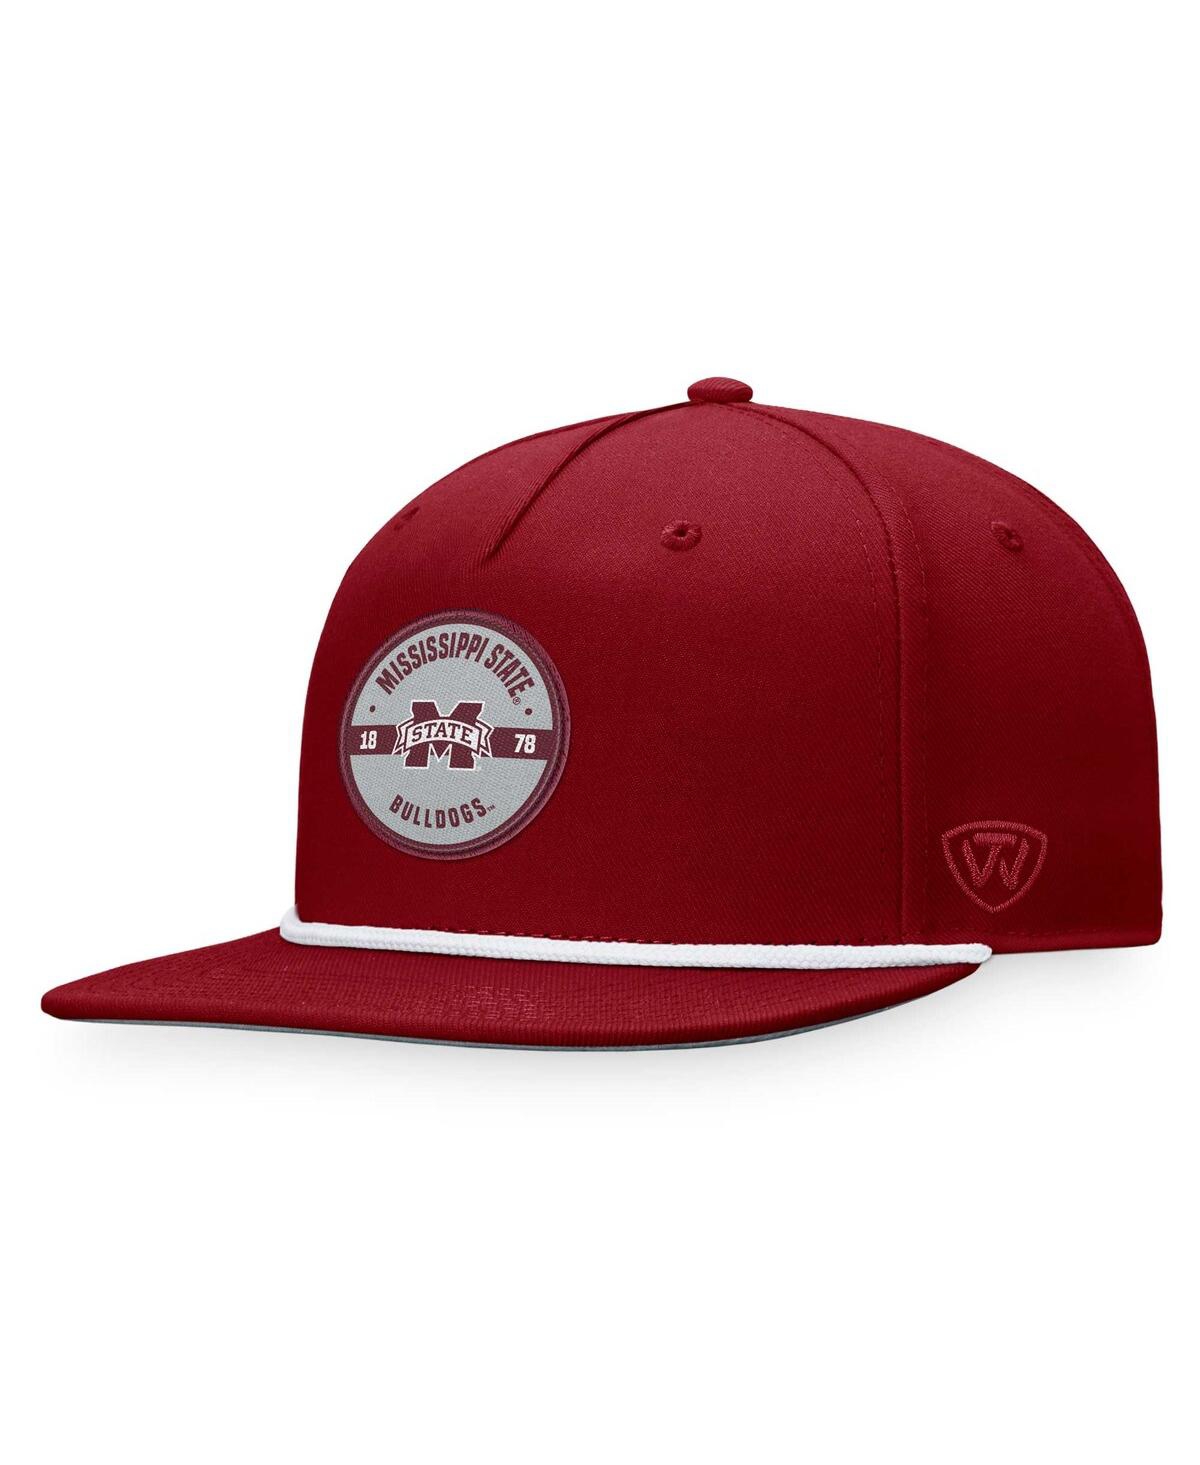 Men's Top of the World Maroon Mississippi State Bulldogs Bank Hat - Maroon